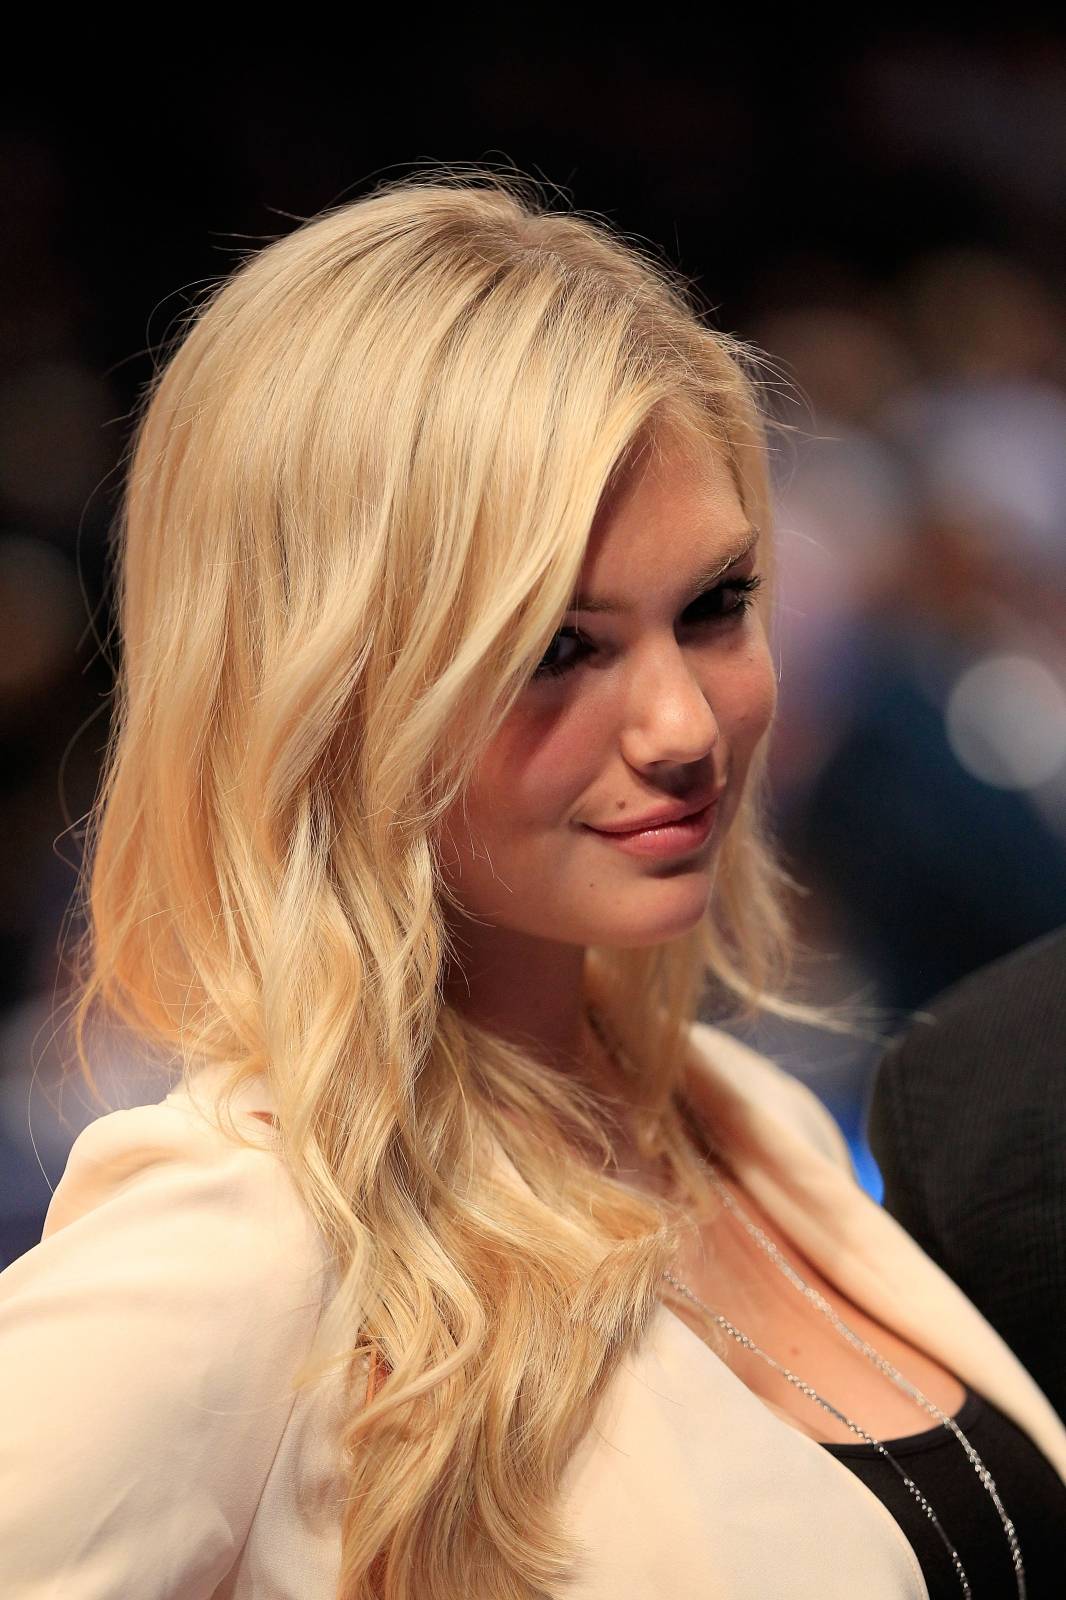 Kate Upton: The 20-year-old Sports Illustrated cover girl